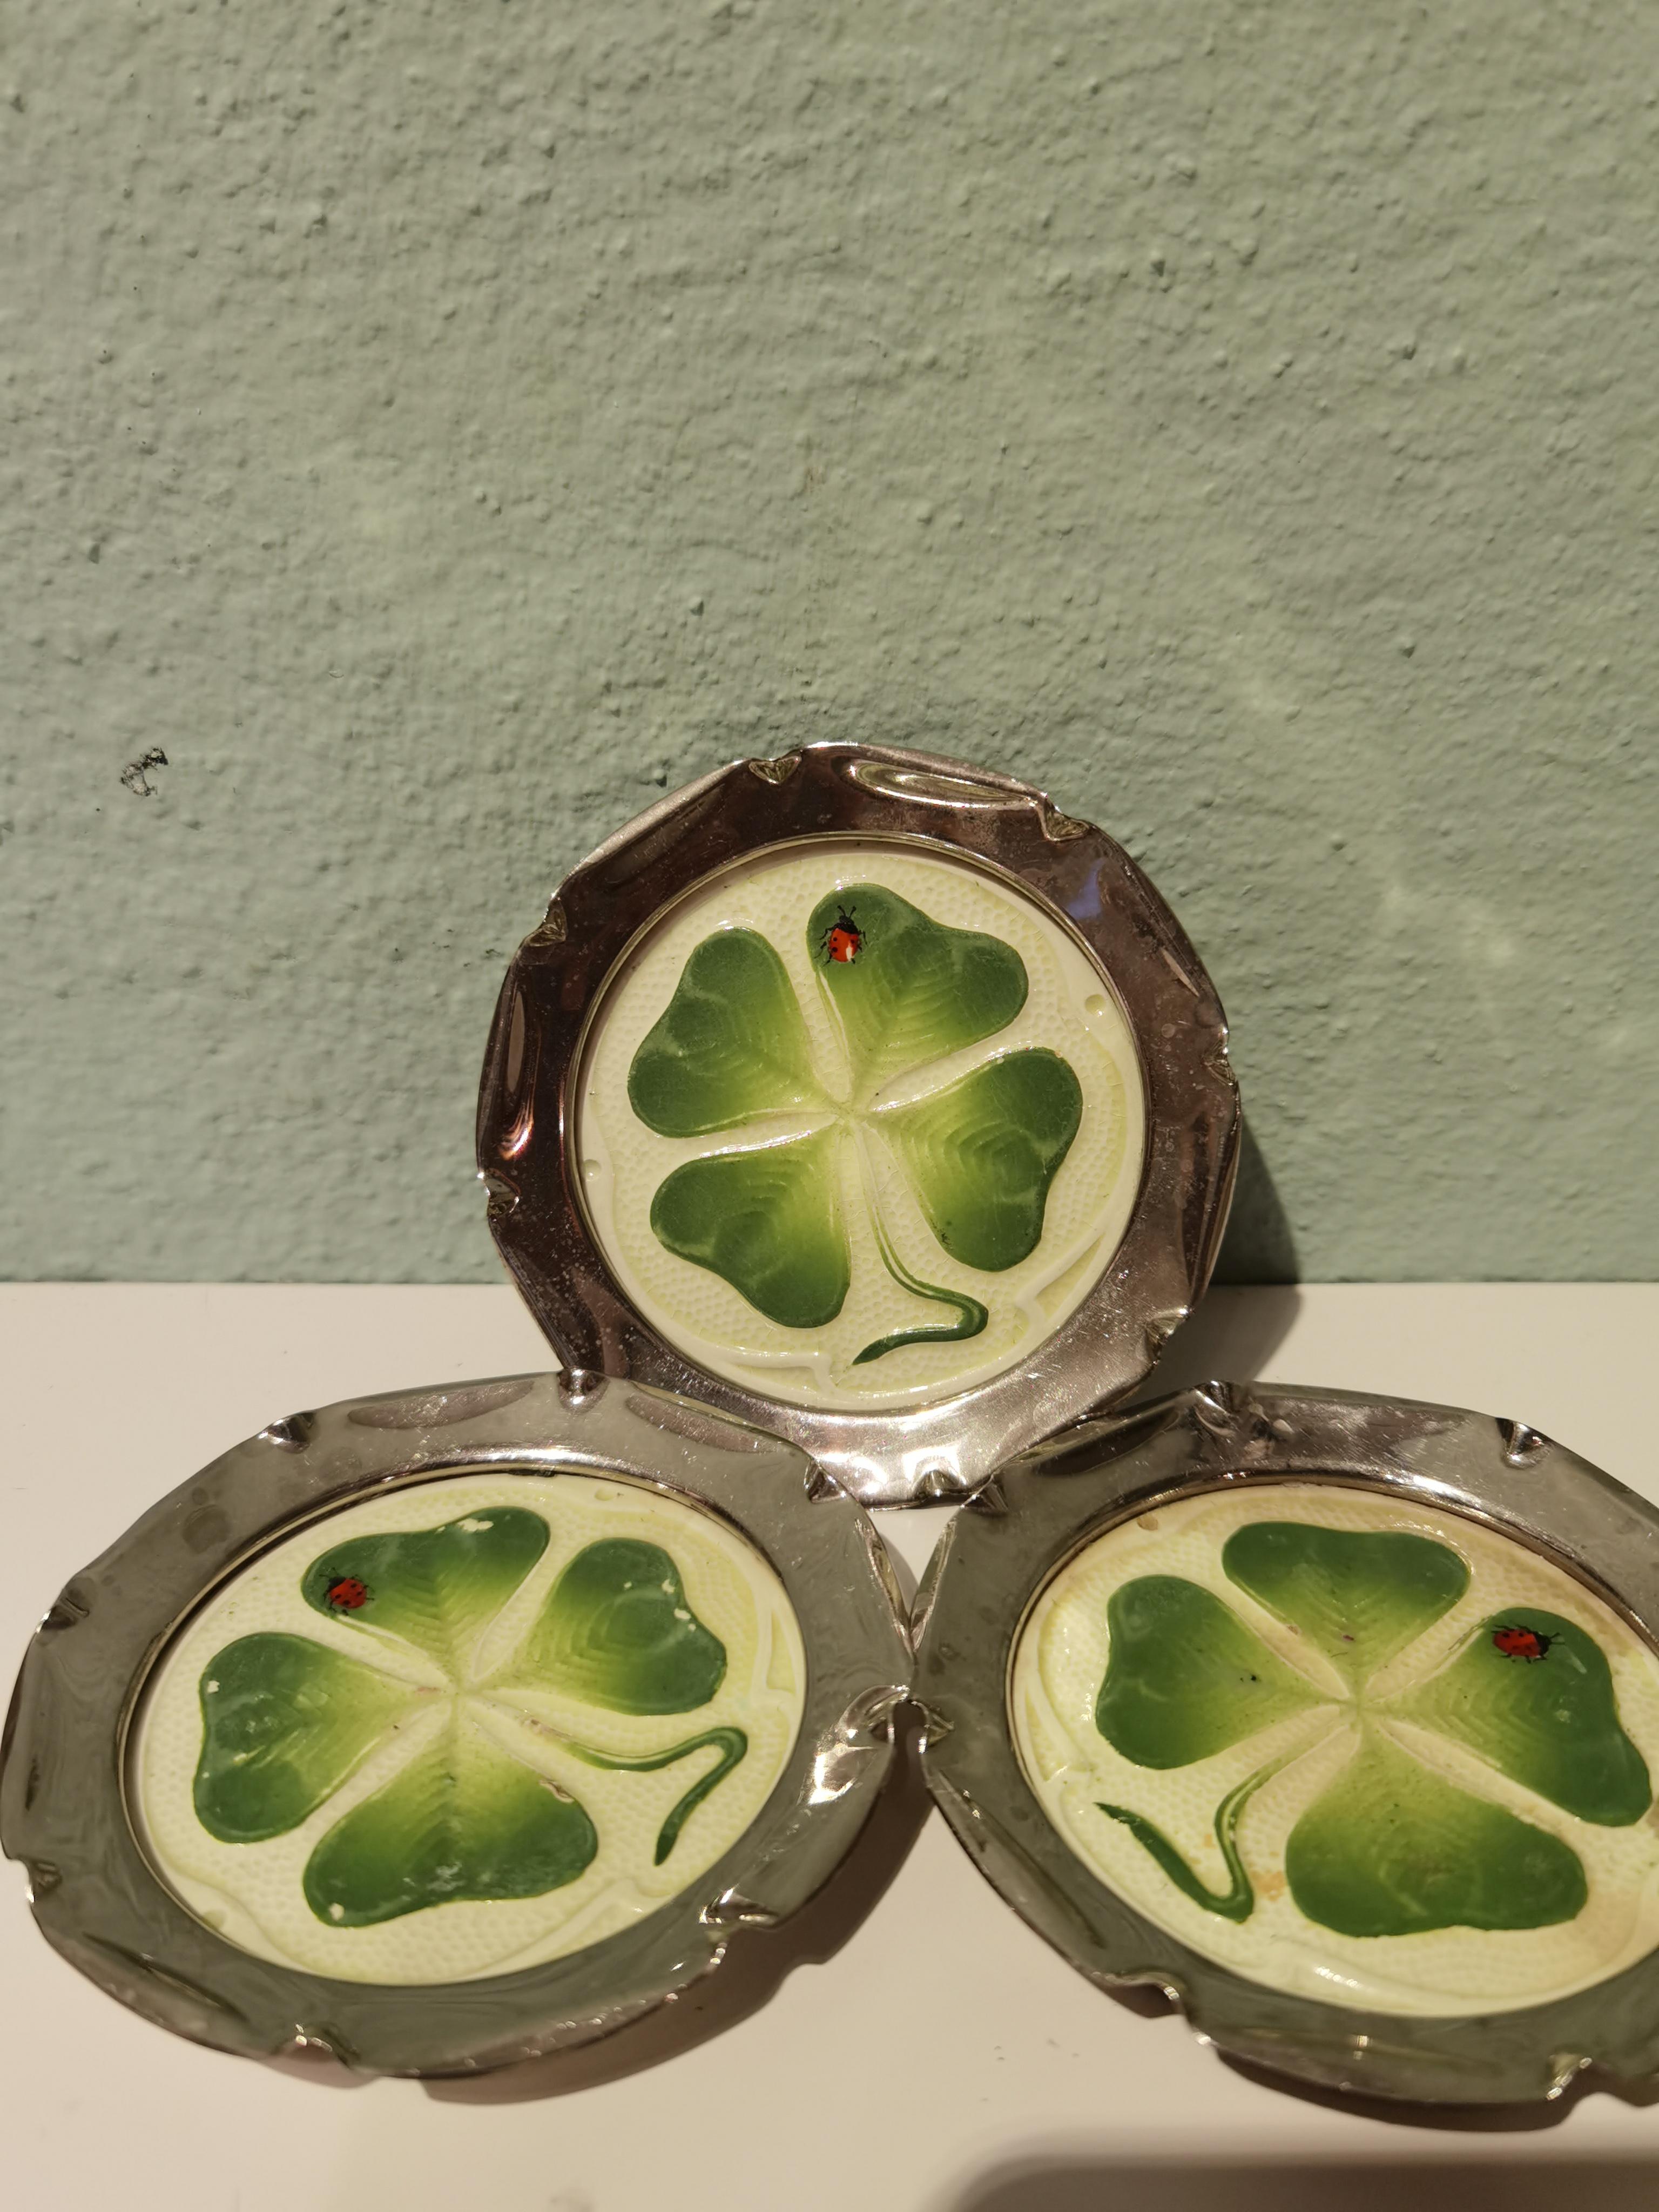 German Set of Six Coasters Art Nouveau Enameled with Four-Leaf Clover Ceramic Inserts